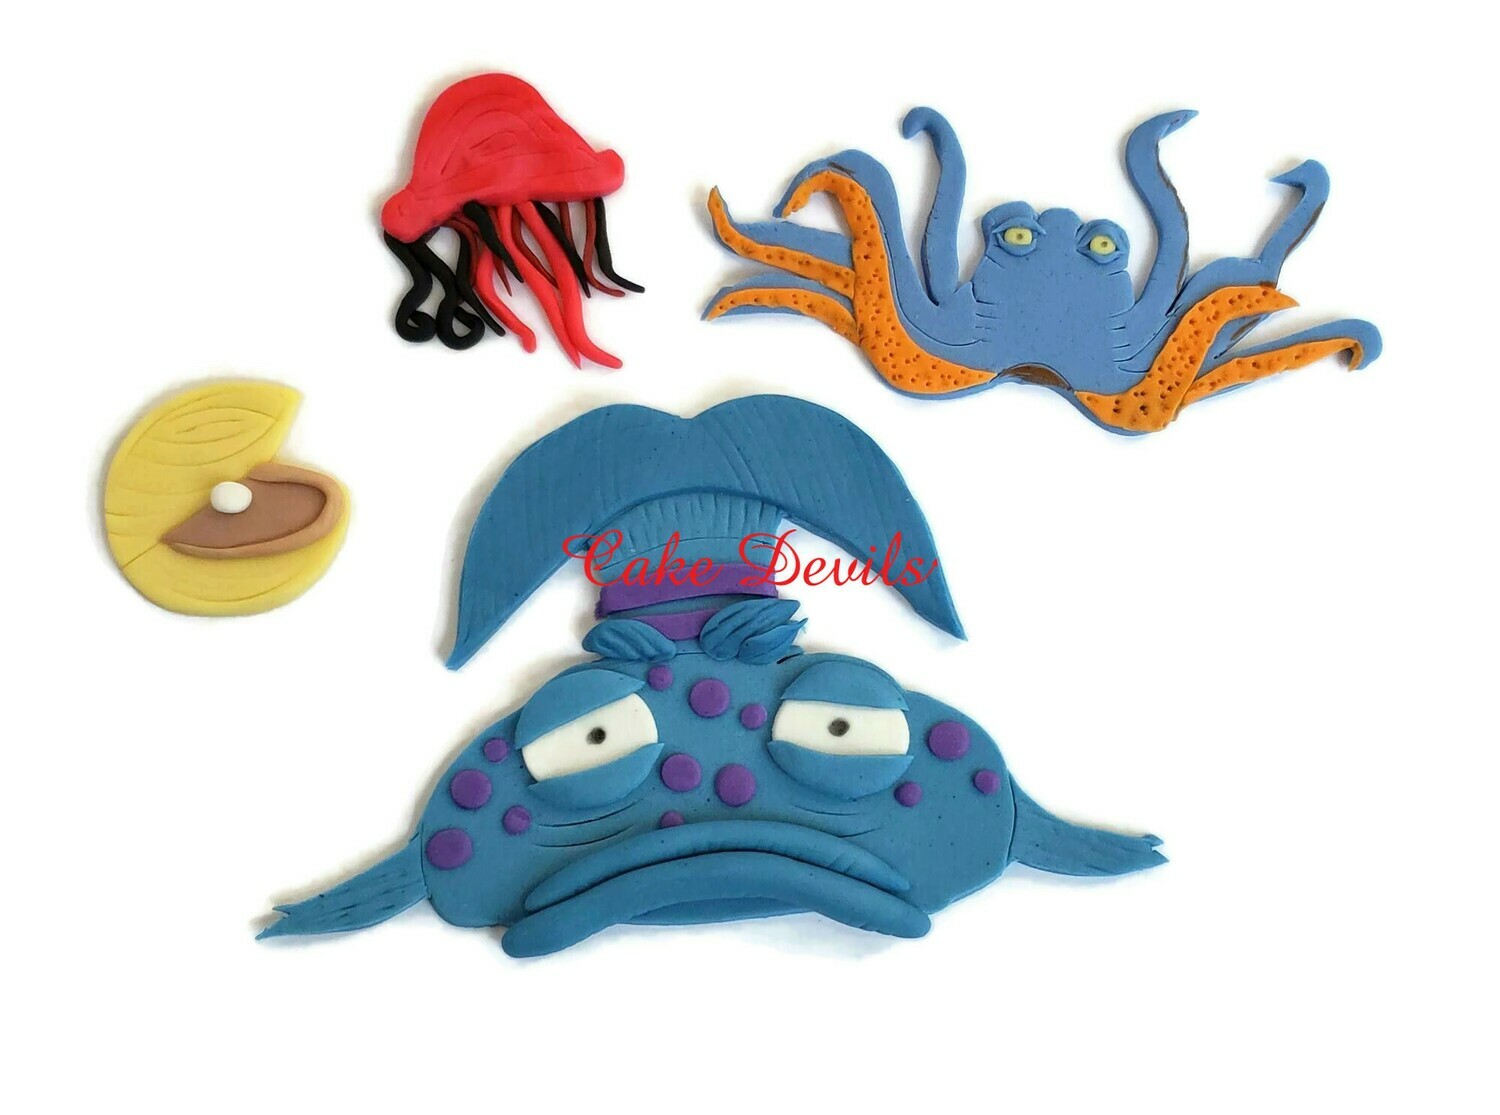 Pout Pout Fish fondant Cake Toppers perfect for an Ocean Life Birthday Cake